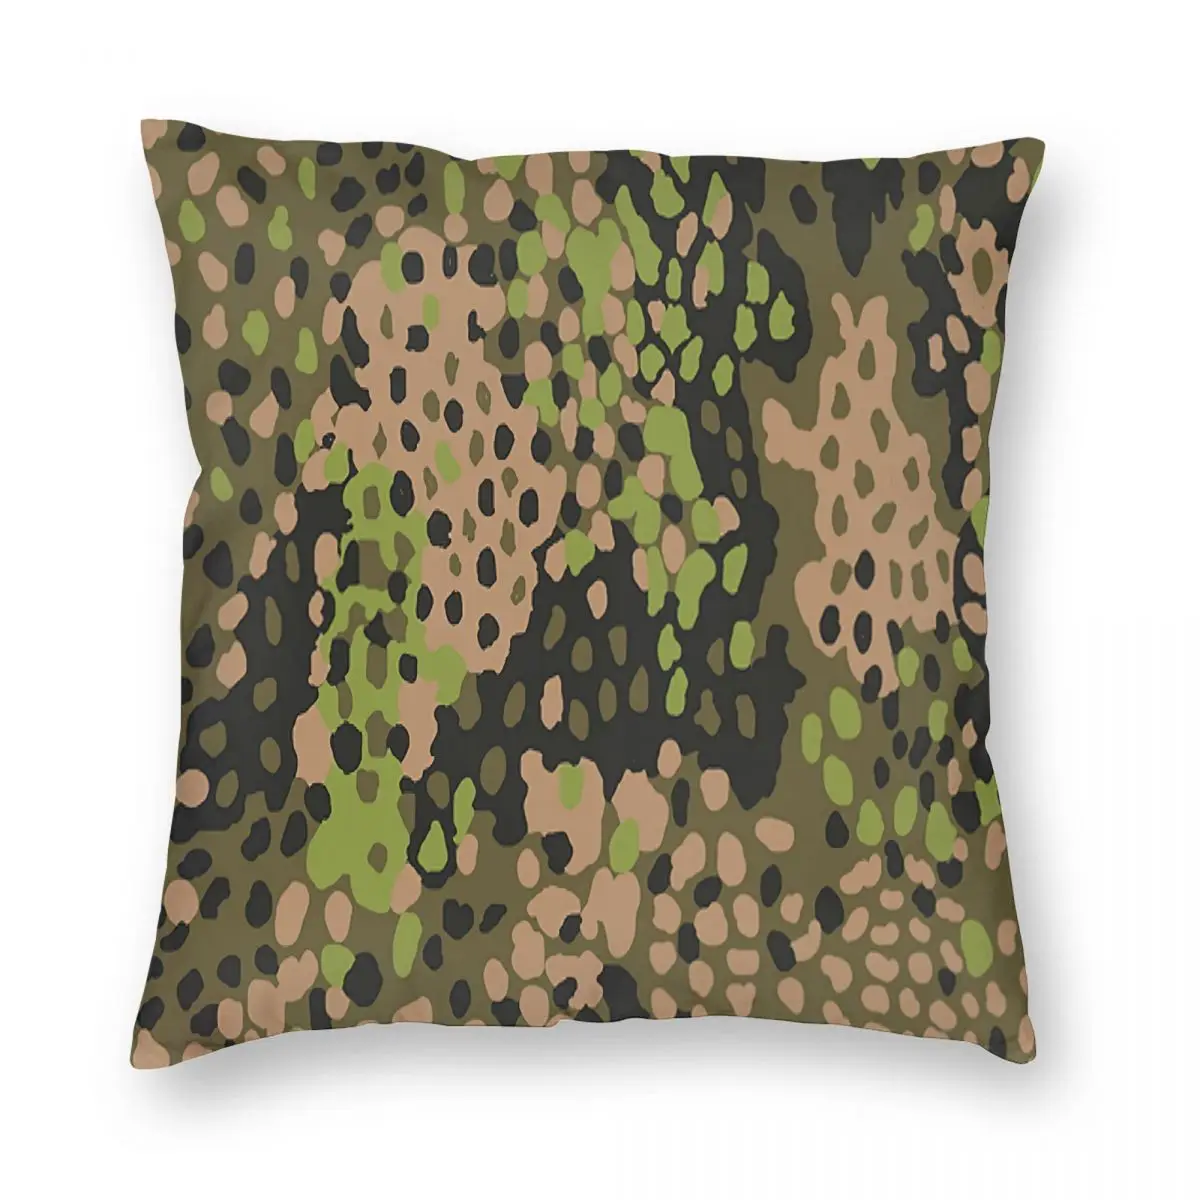 

WW2 SS Erbsentarn Camo Camouflage Pillowcase Soft Polyester Cushion Cover Gift Military Army Throw Pillow Case Cover Home Zipper